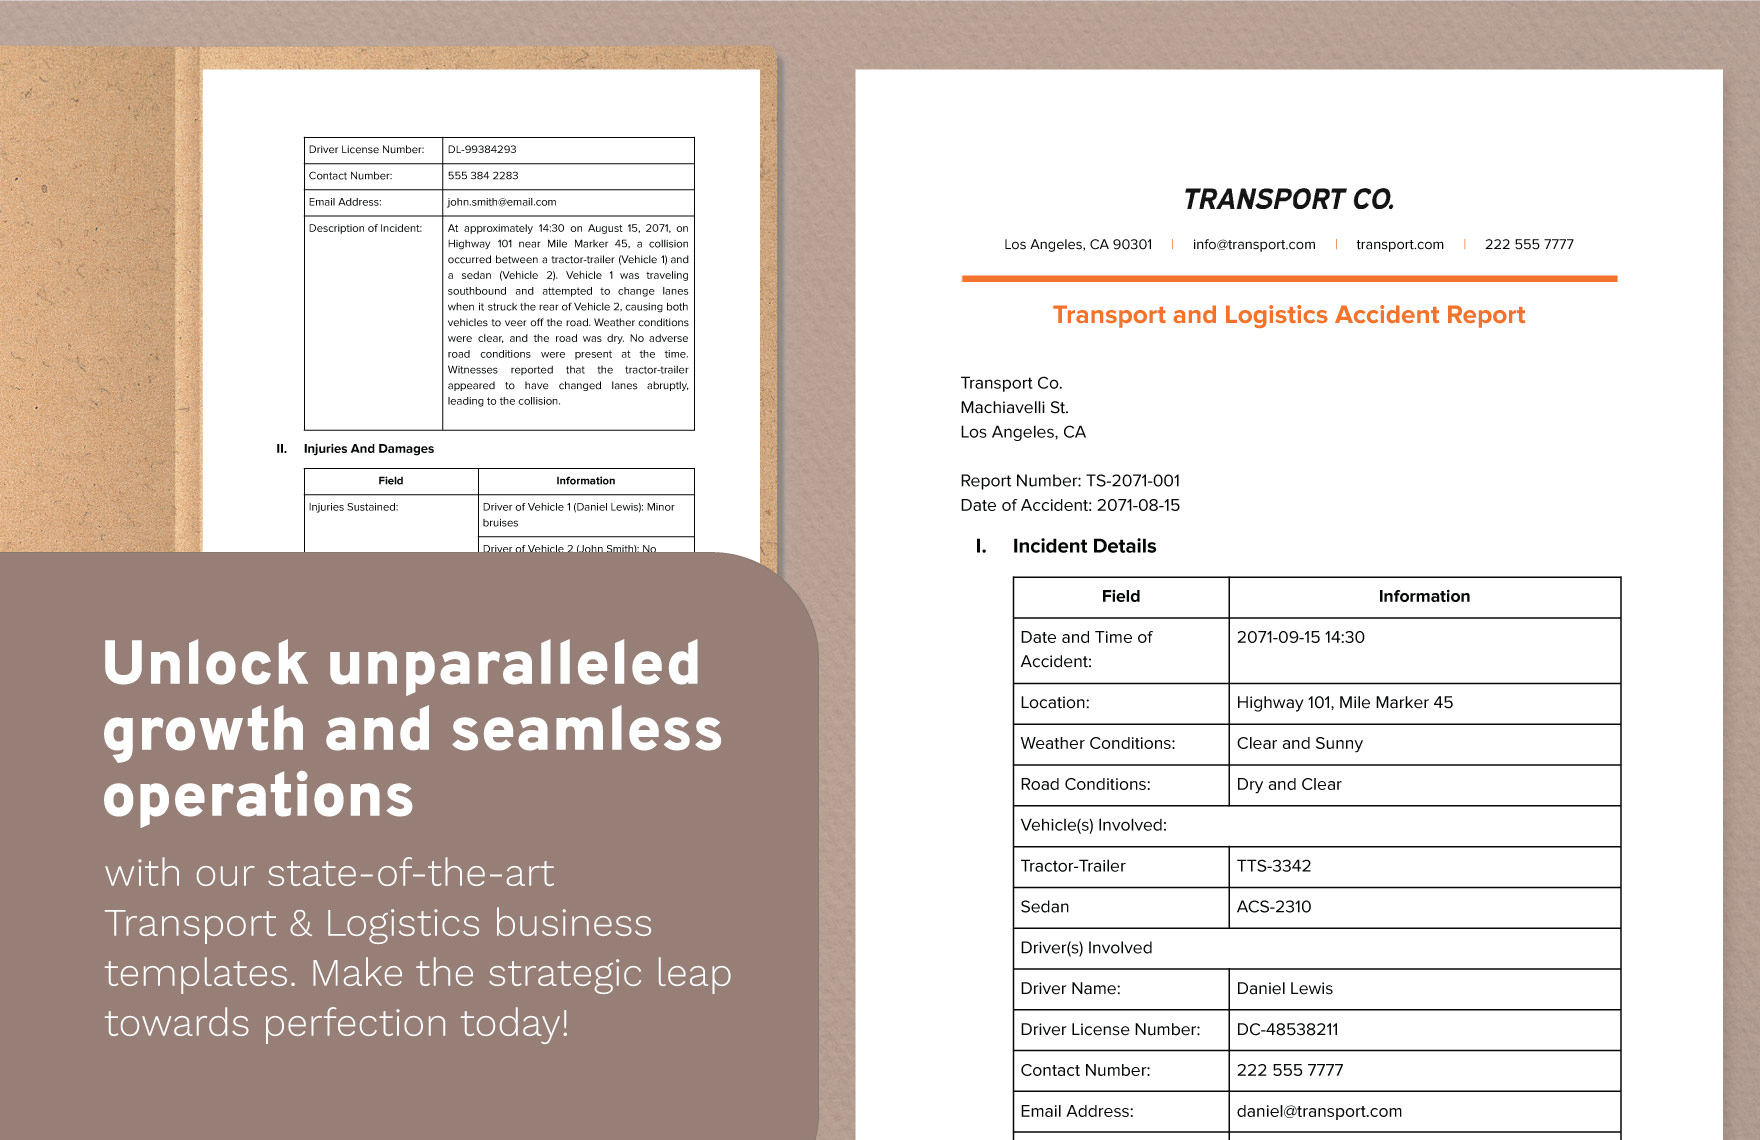 Transport and Logistics Accident Report Template